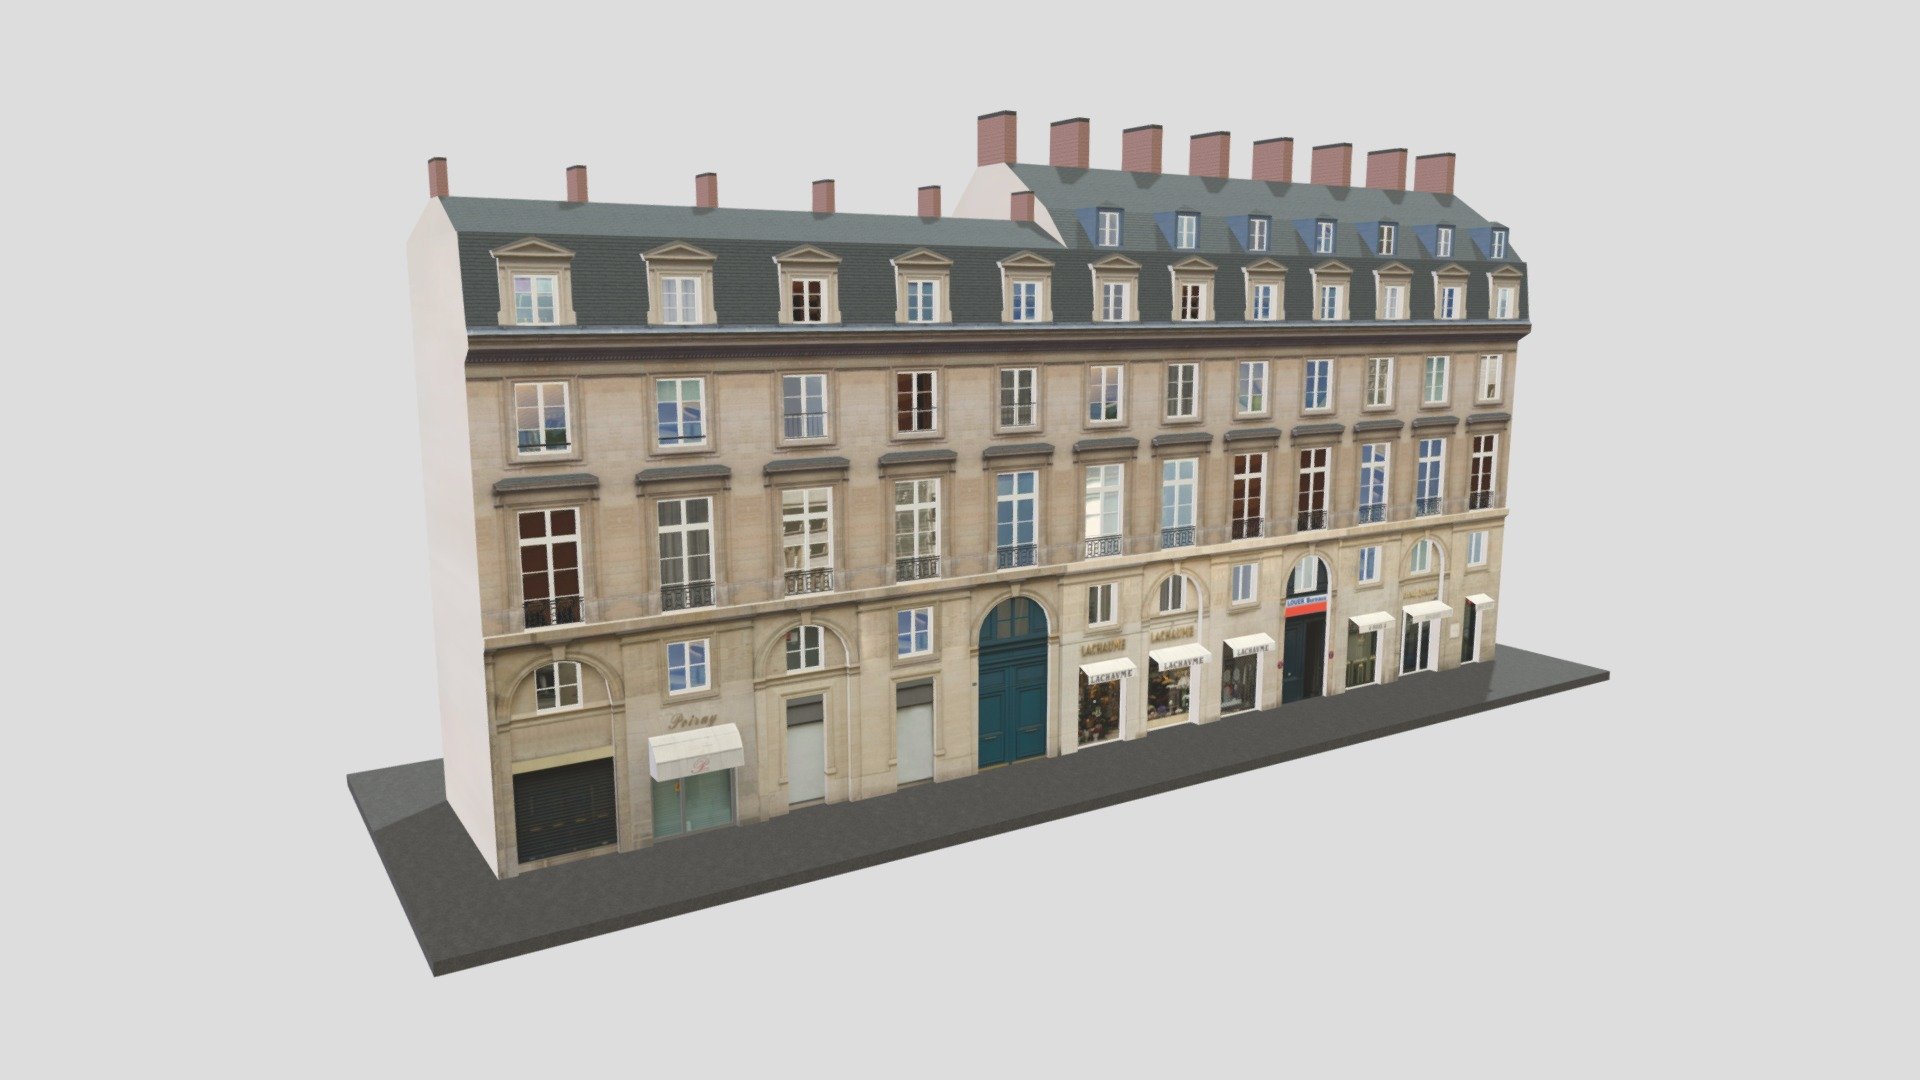 Paris Corner ApartmentBuilding 10

Originally created with 3ds Max 2015 and rendered in V-Ray 3.0.

Total Poly Counts:
Poly Count = 18336
Vertex Count = 21923

https://nuralam3d.blogspot.com/2021/09/paris-corner-apartment-building-10.html - Paris Corner ApartmentBuilding 10 - 3D model by nuralam018 3d model